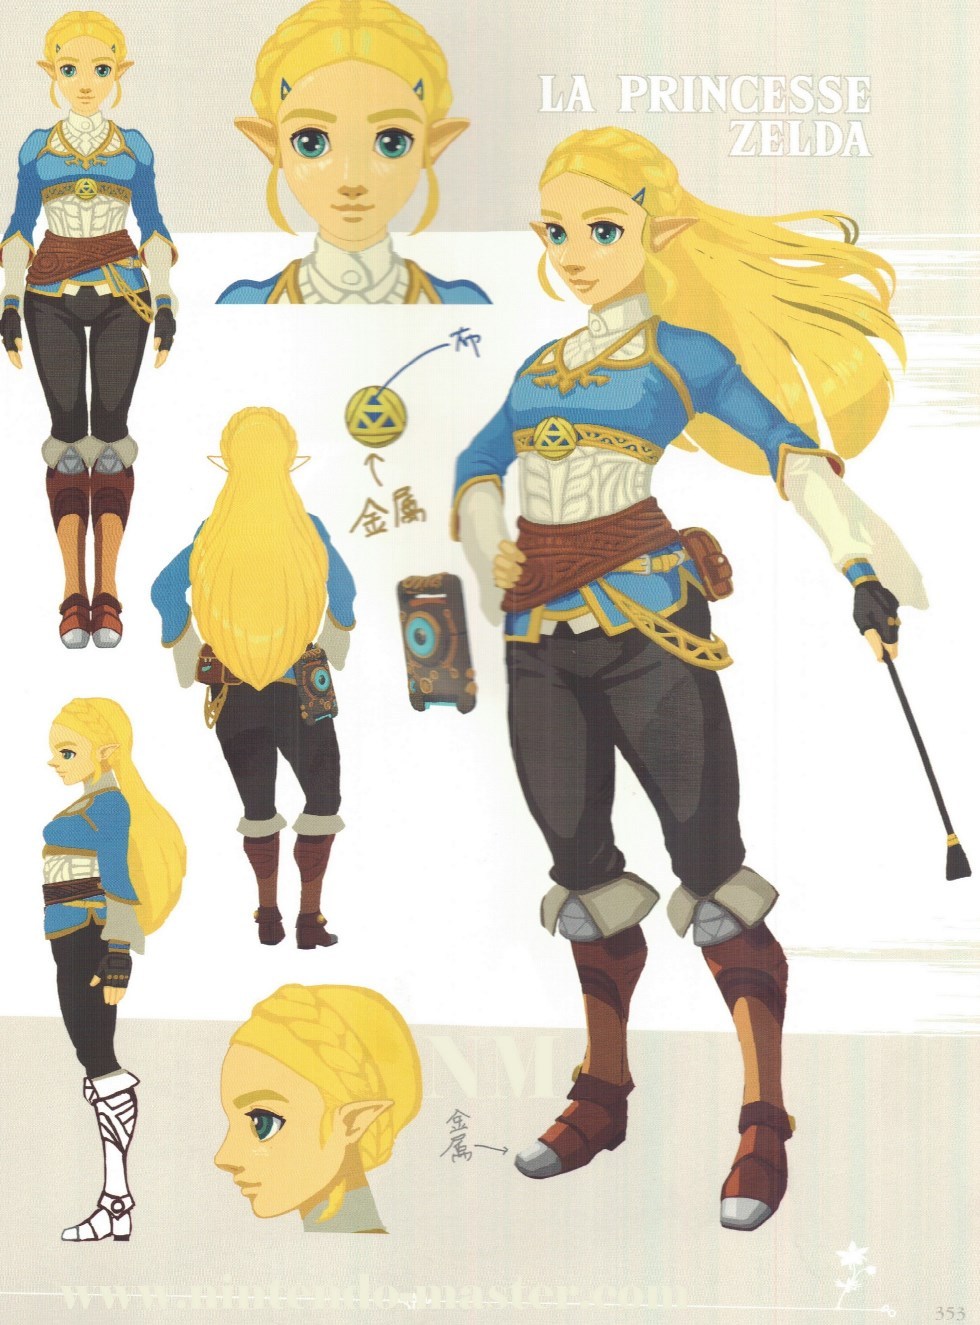 l-a-l-o-u:  munettie: REFERENCE CONCEPTARTWORK!  I CAN’T BELIEVE THE FRENCH TRANSLATION